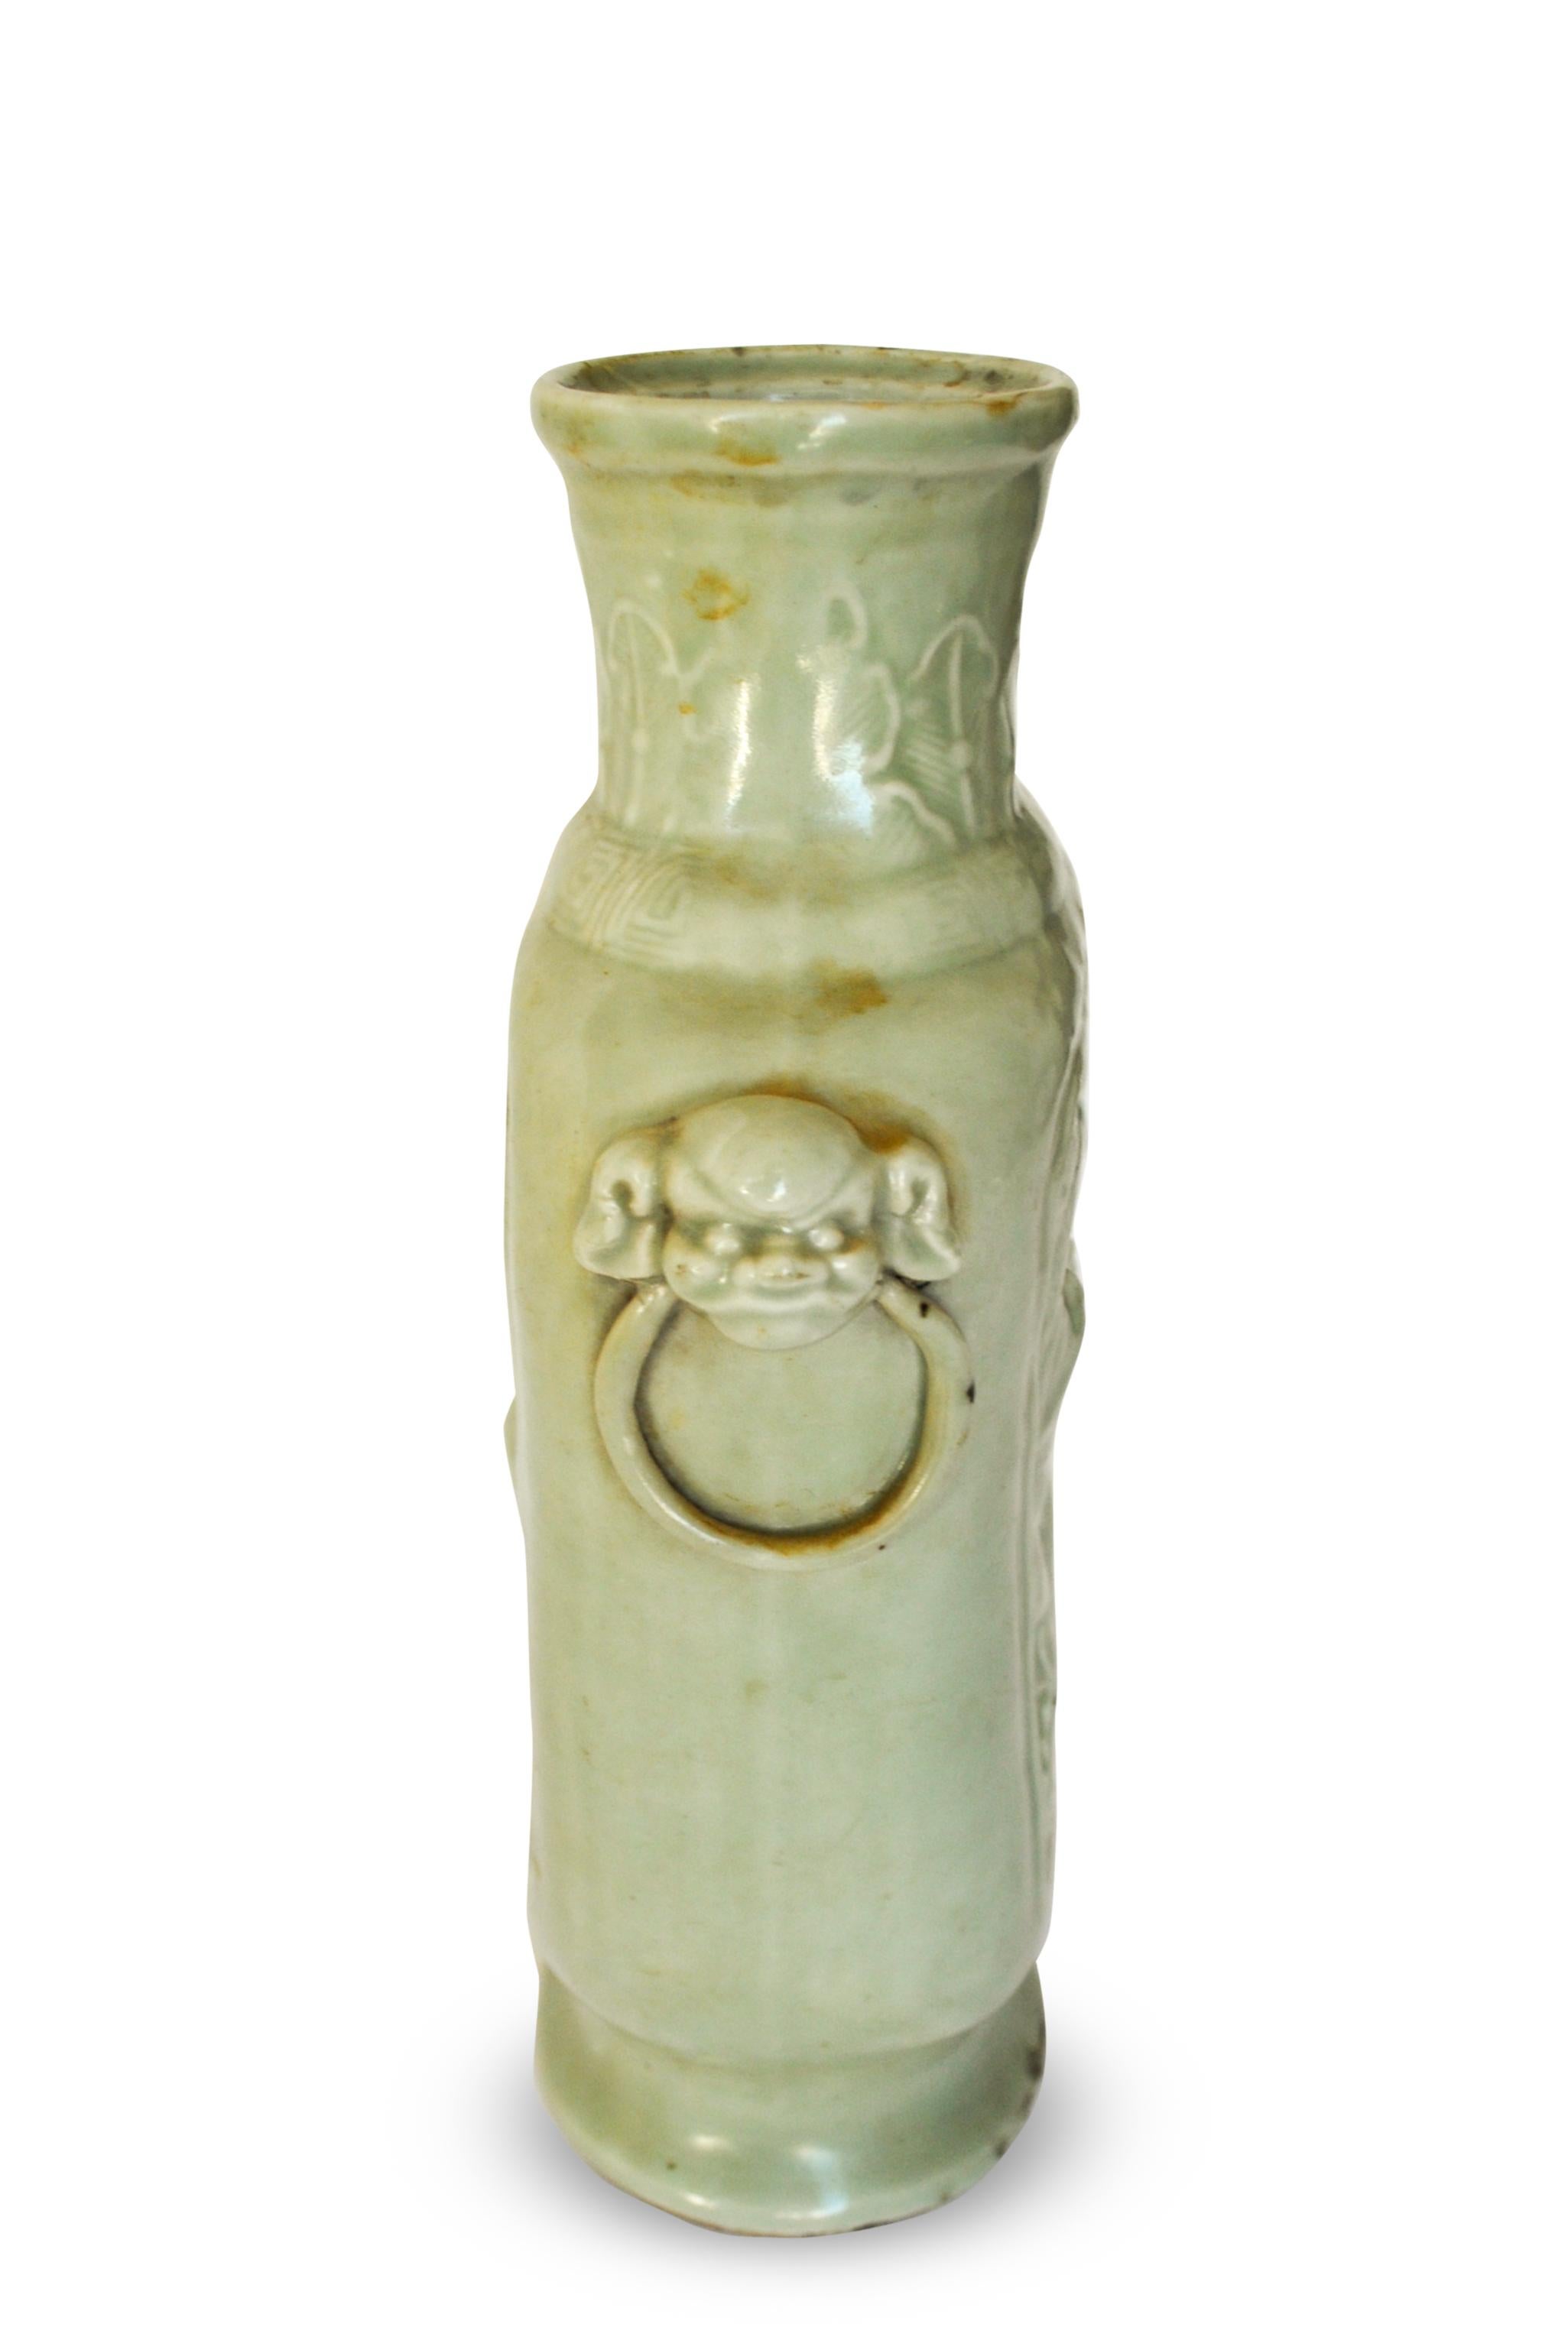 Celadon Porcelain vase is a beautiful Chinese vase of the Kangxi period (1654-1722), with an ovoid shape and relief decoration of dragons competing for the flaming pearl.

At the base, Chinese characters are engraved.

In excellent condition,